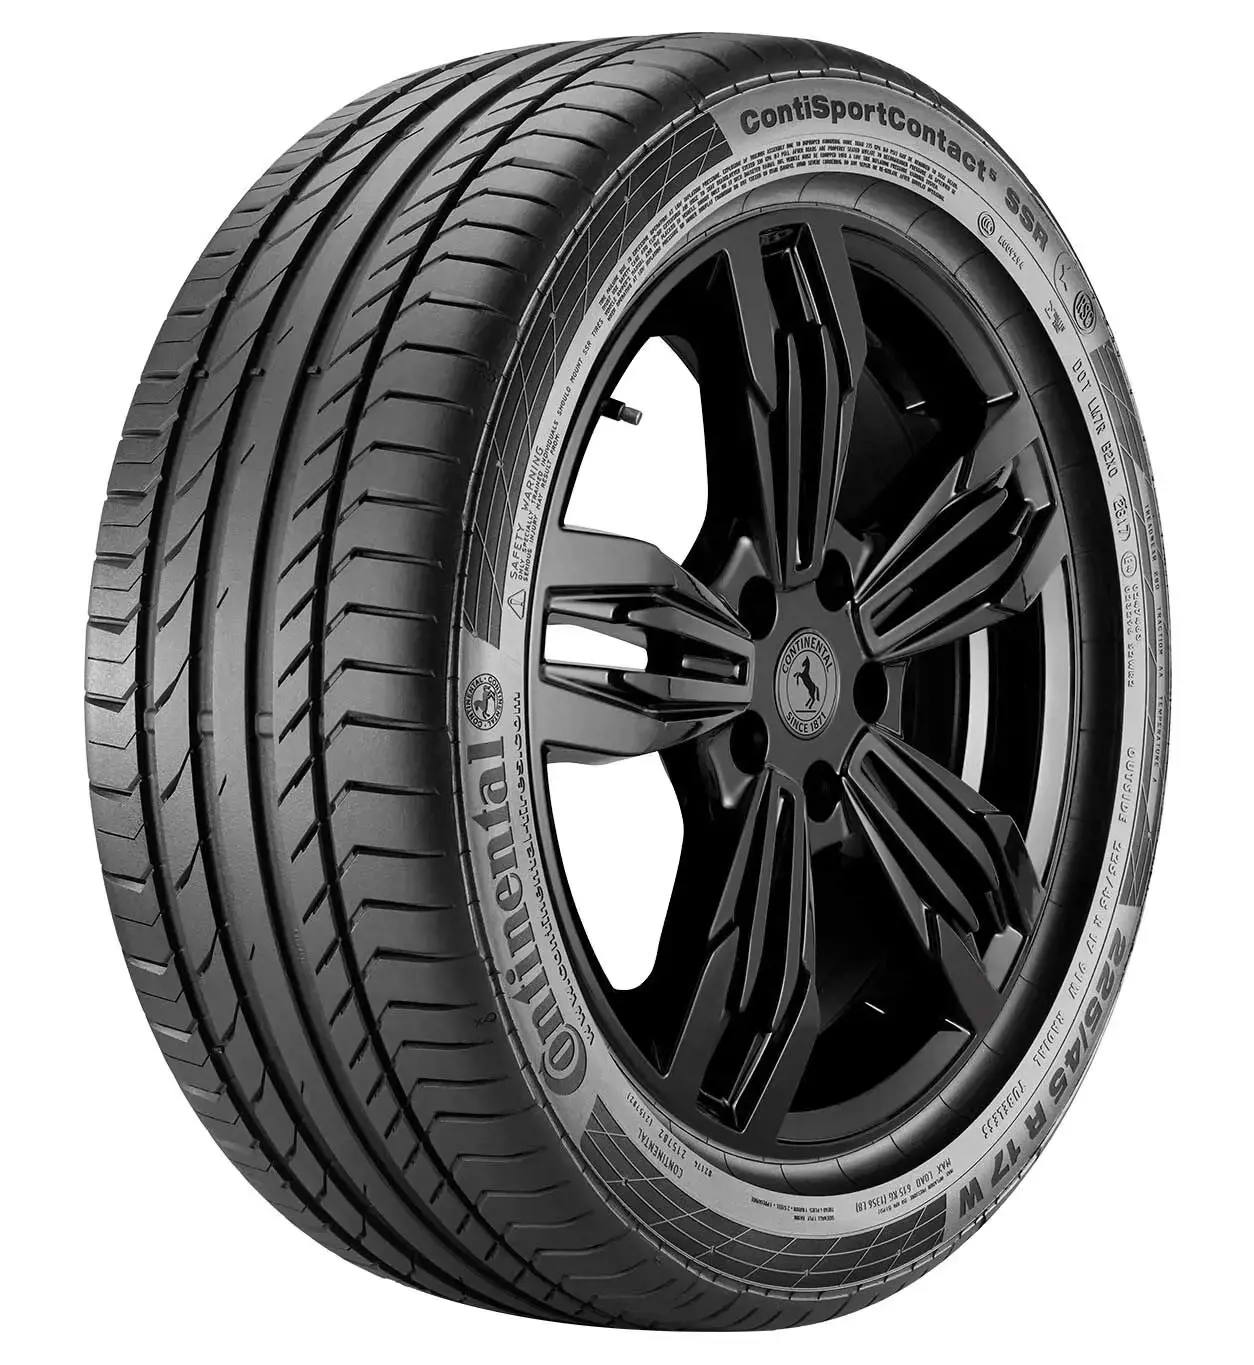 5 Continental R17 SportContact 81W 195/45